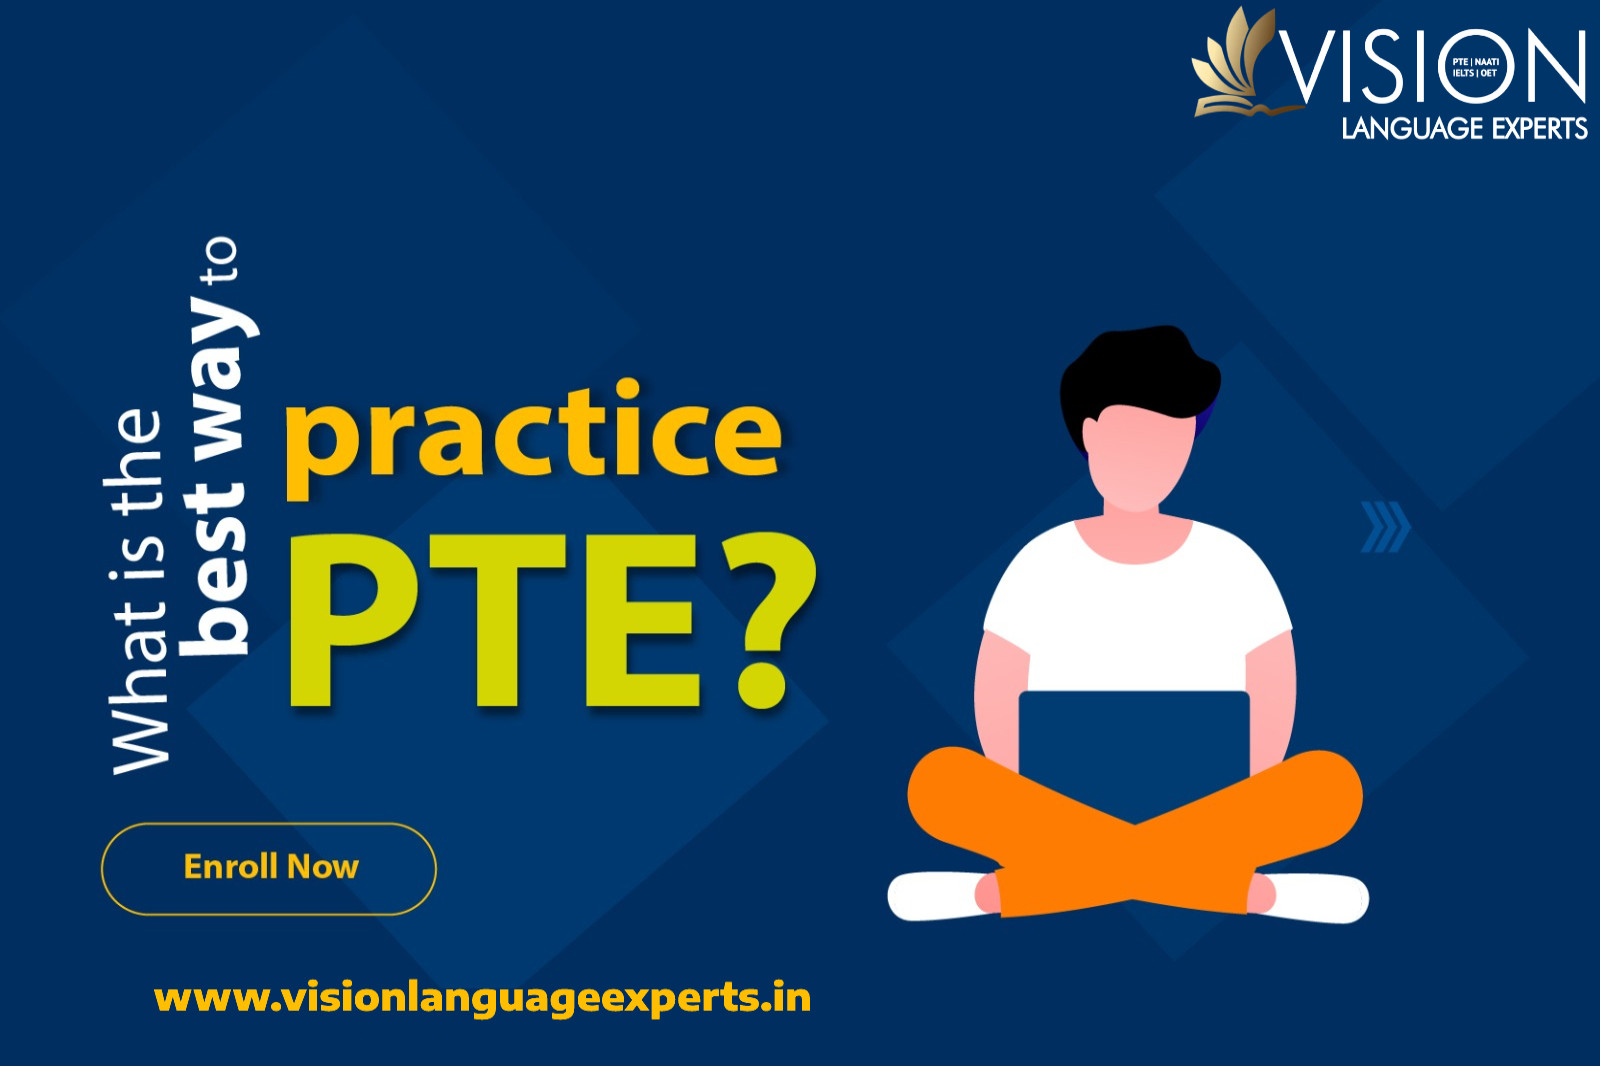 What is the Best Way to Practice PTE?